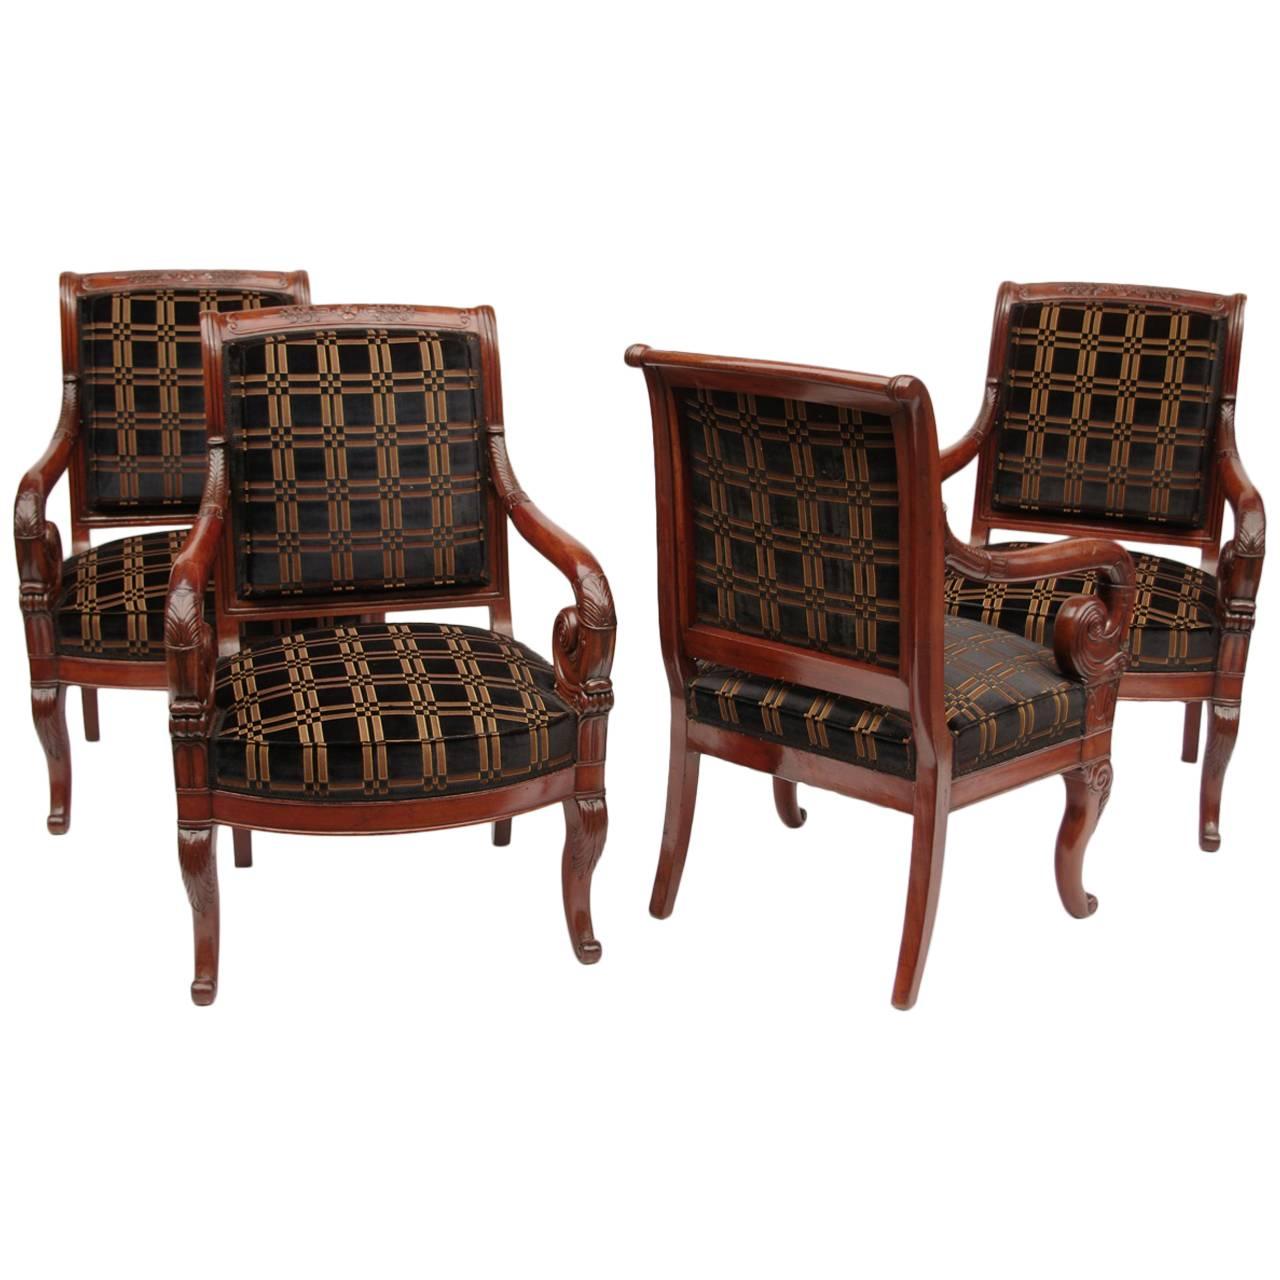 Set of Four Restauration Period Mahogany Armchairs